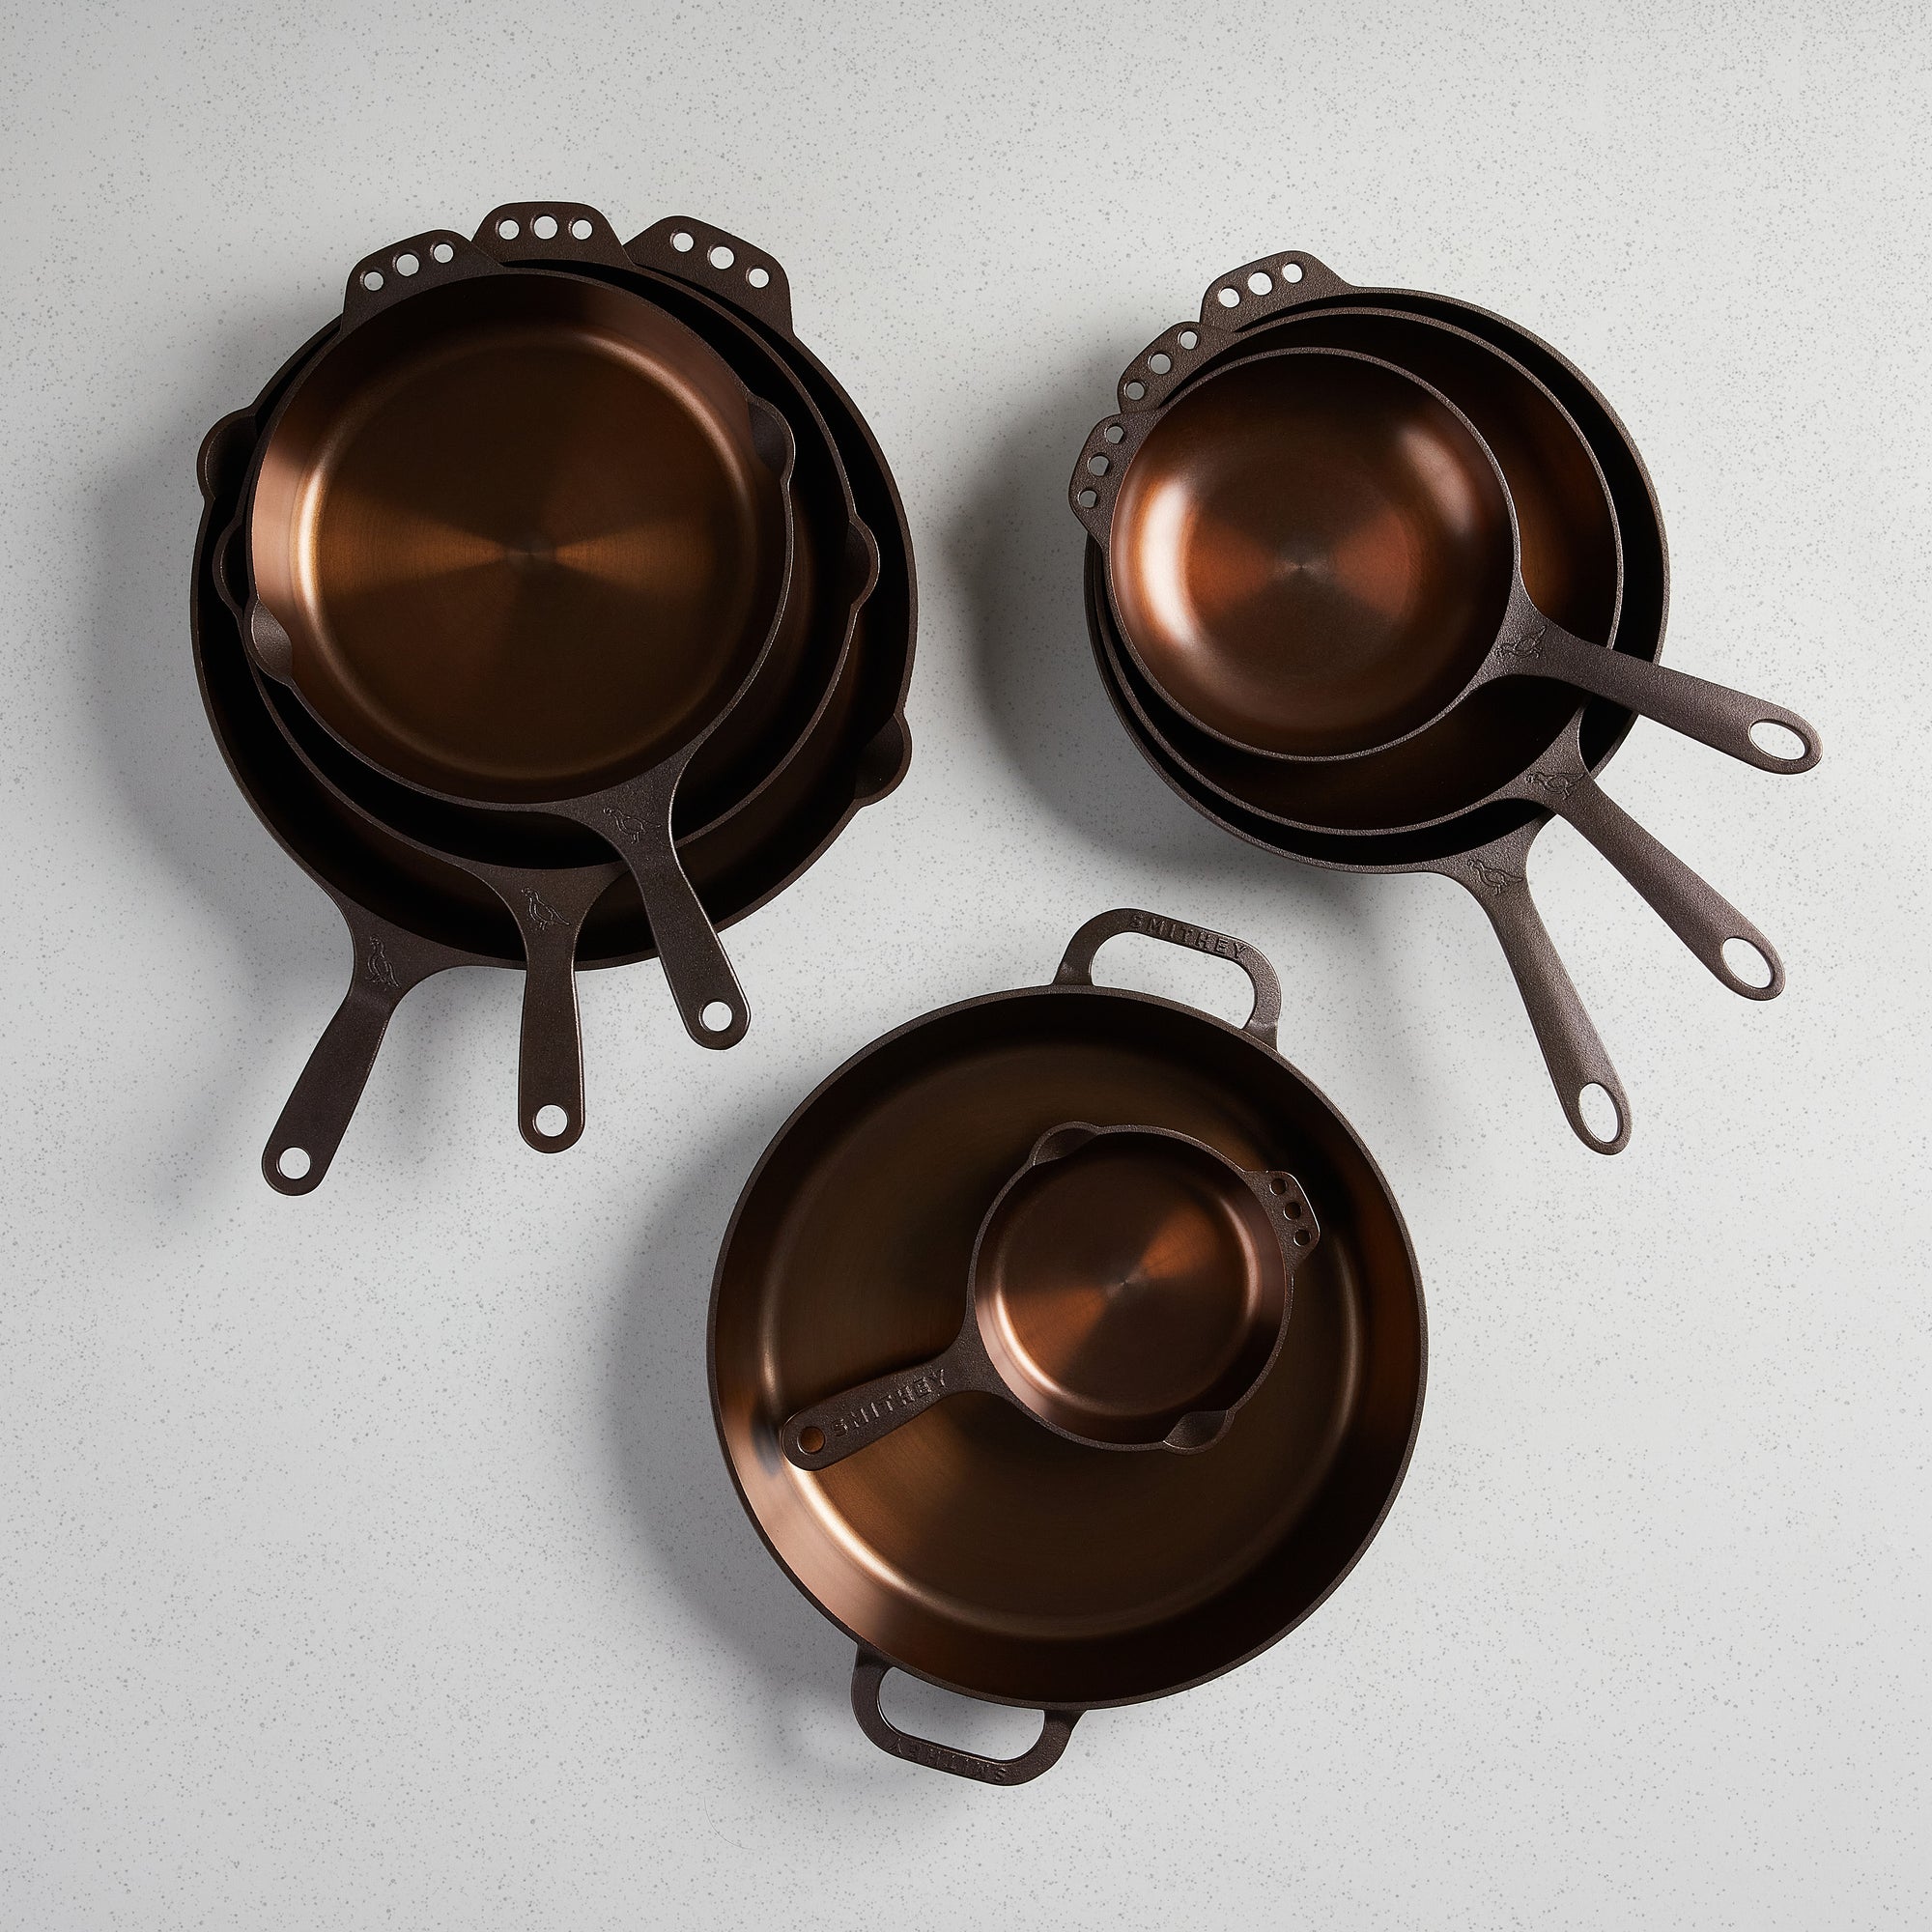 The Ultimate 22-Piece Set – Smithey Ironware